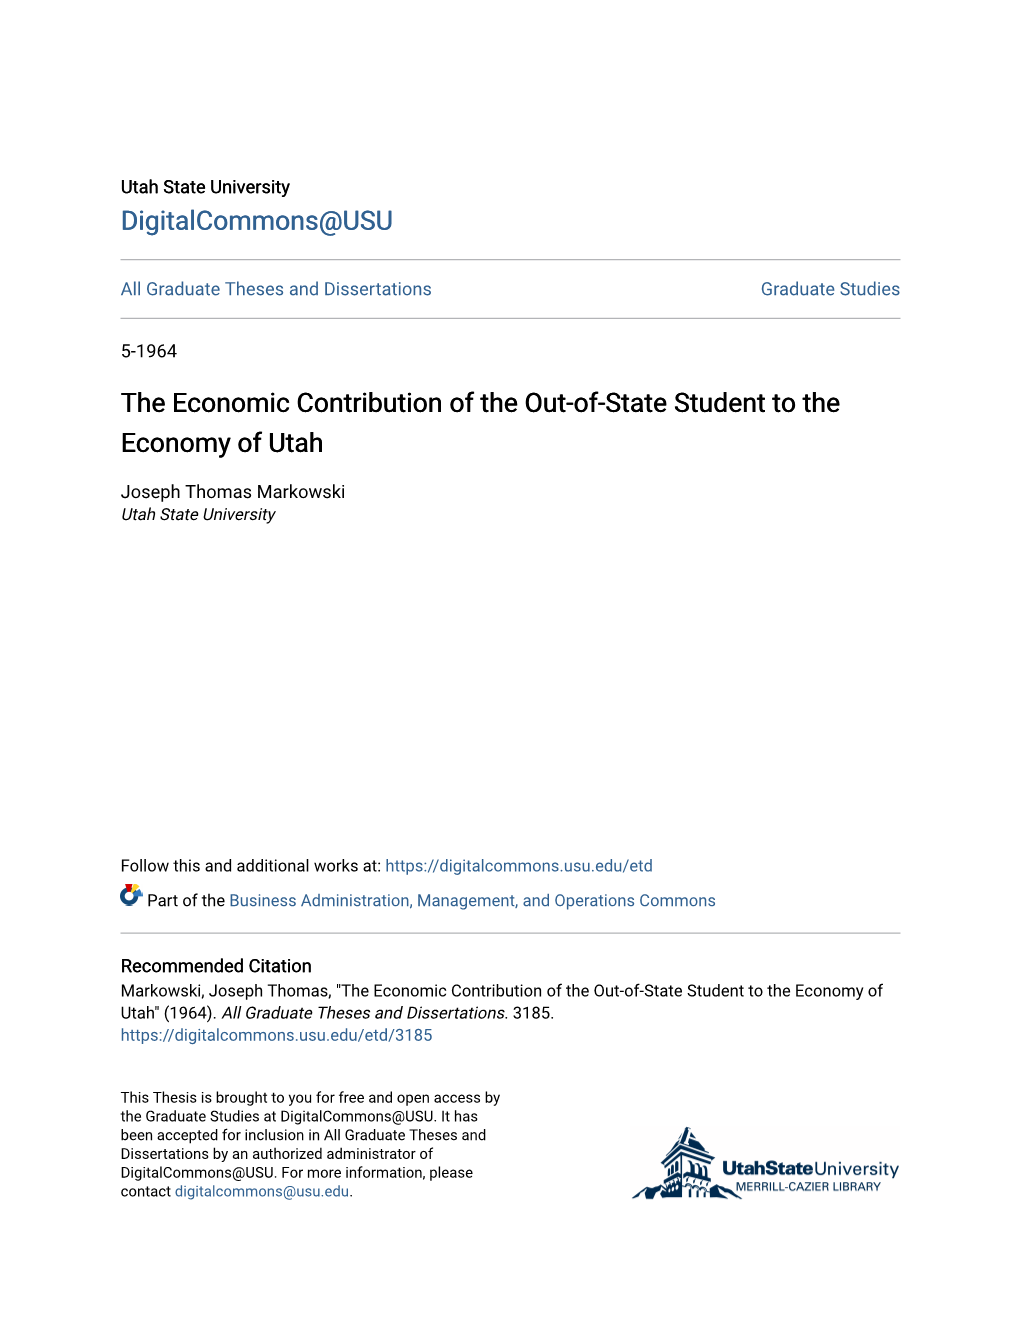 The Economic Contribution of the Out-Of-State Student to the Economy of Utah